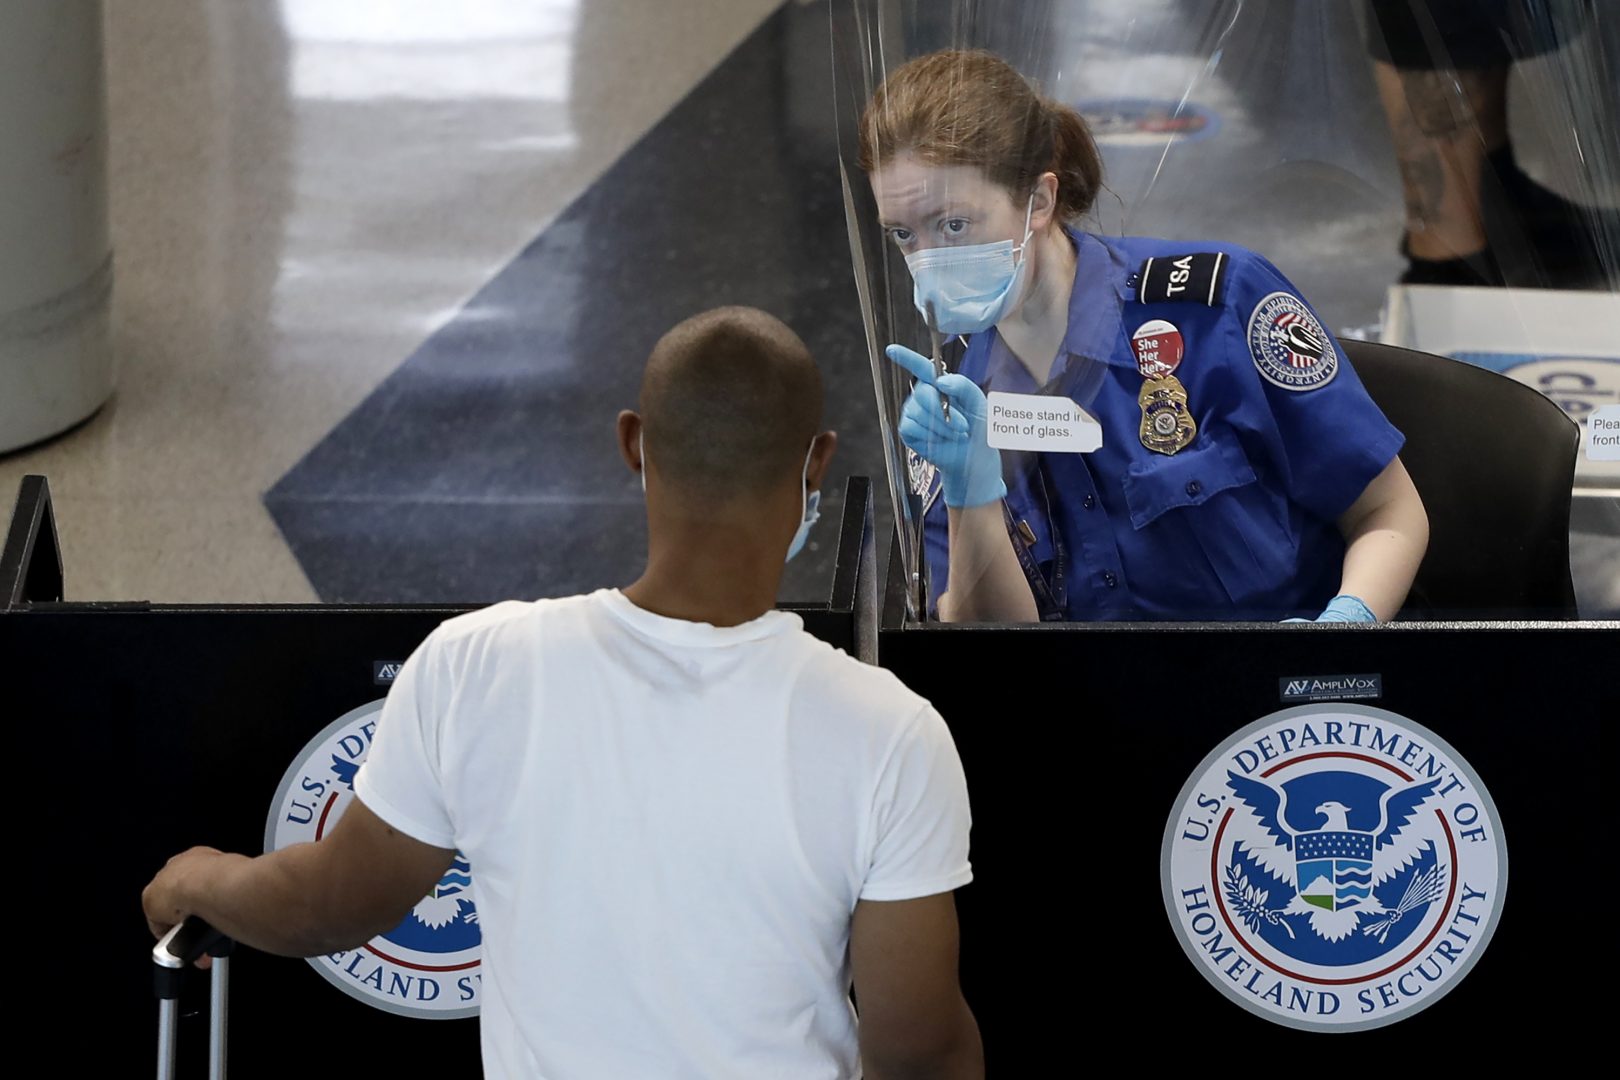 A Transportation Security Administration officer, right, talks with a passenger at a security checkpoint in O'Hare International Airport, Tuesday, June 16, 2020, in Chicago. Beginning June 16 at American Airlines and June 18 at United Airlines, all passengers and crew members will be required to wear masks to prevent the spread of the coronavirus. (AP Photo/Nam Y. Huh)